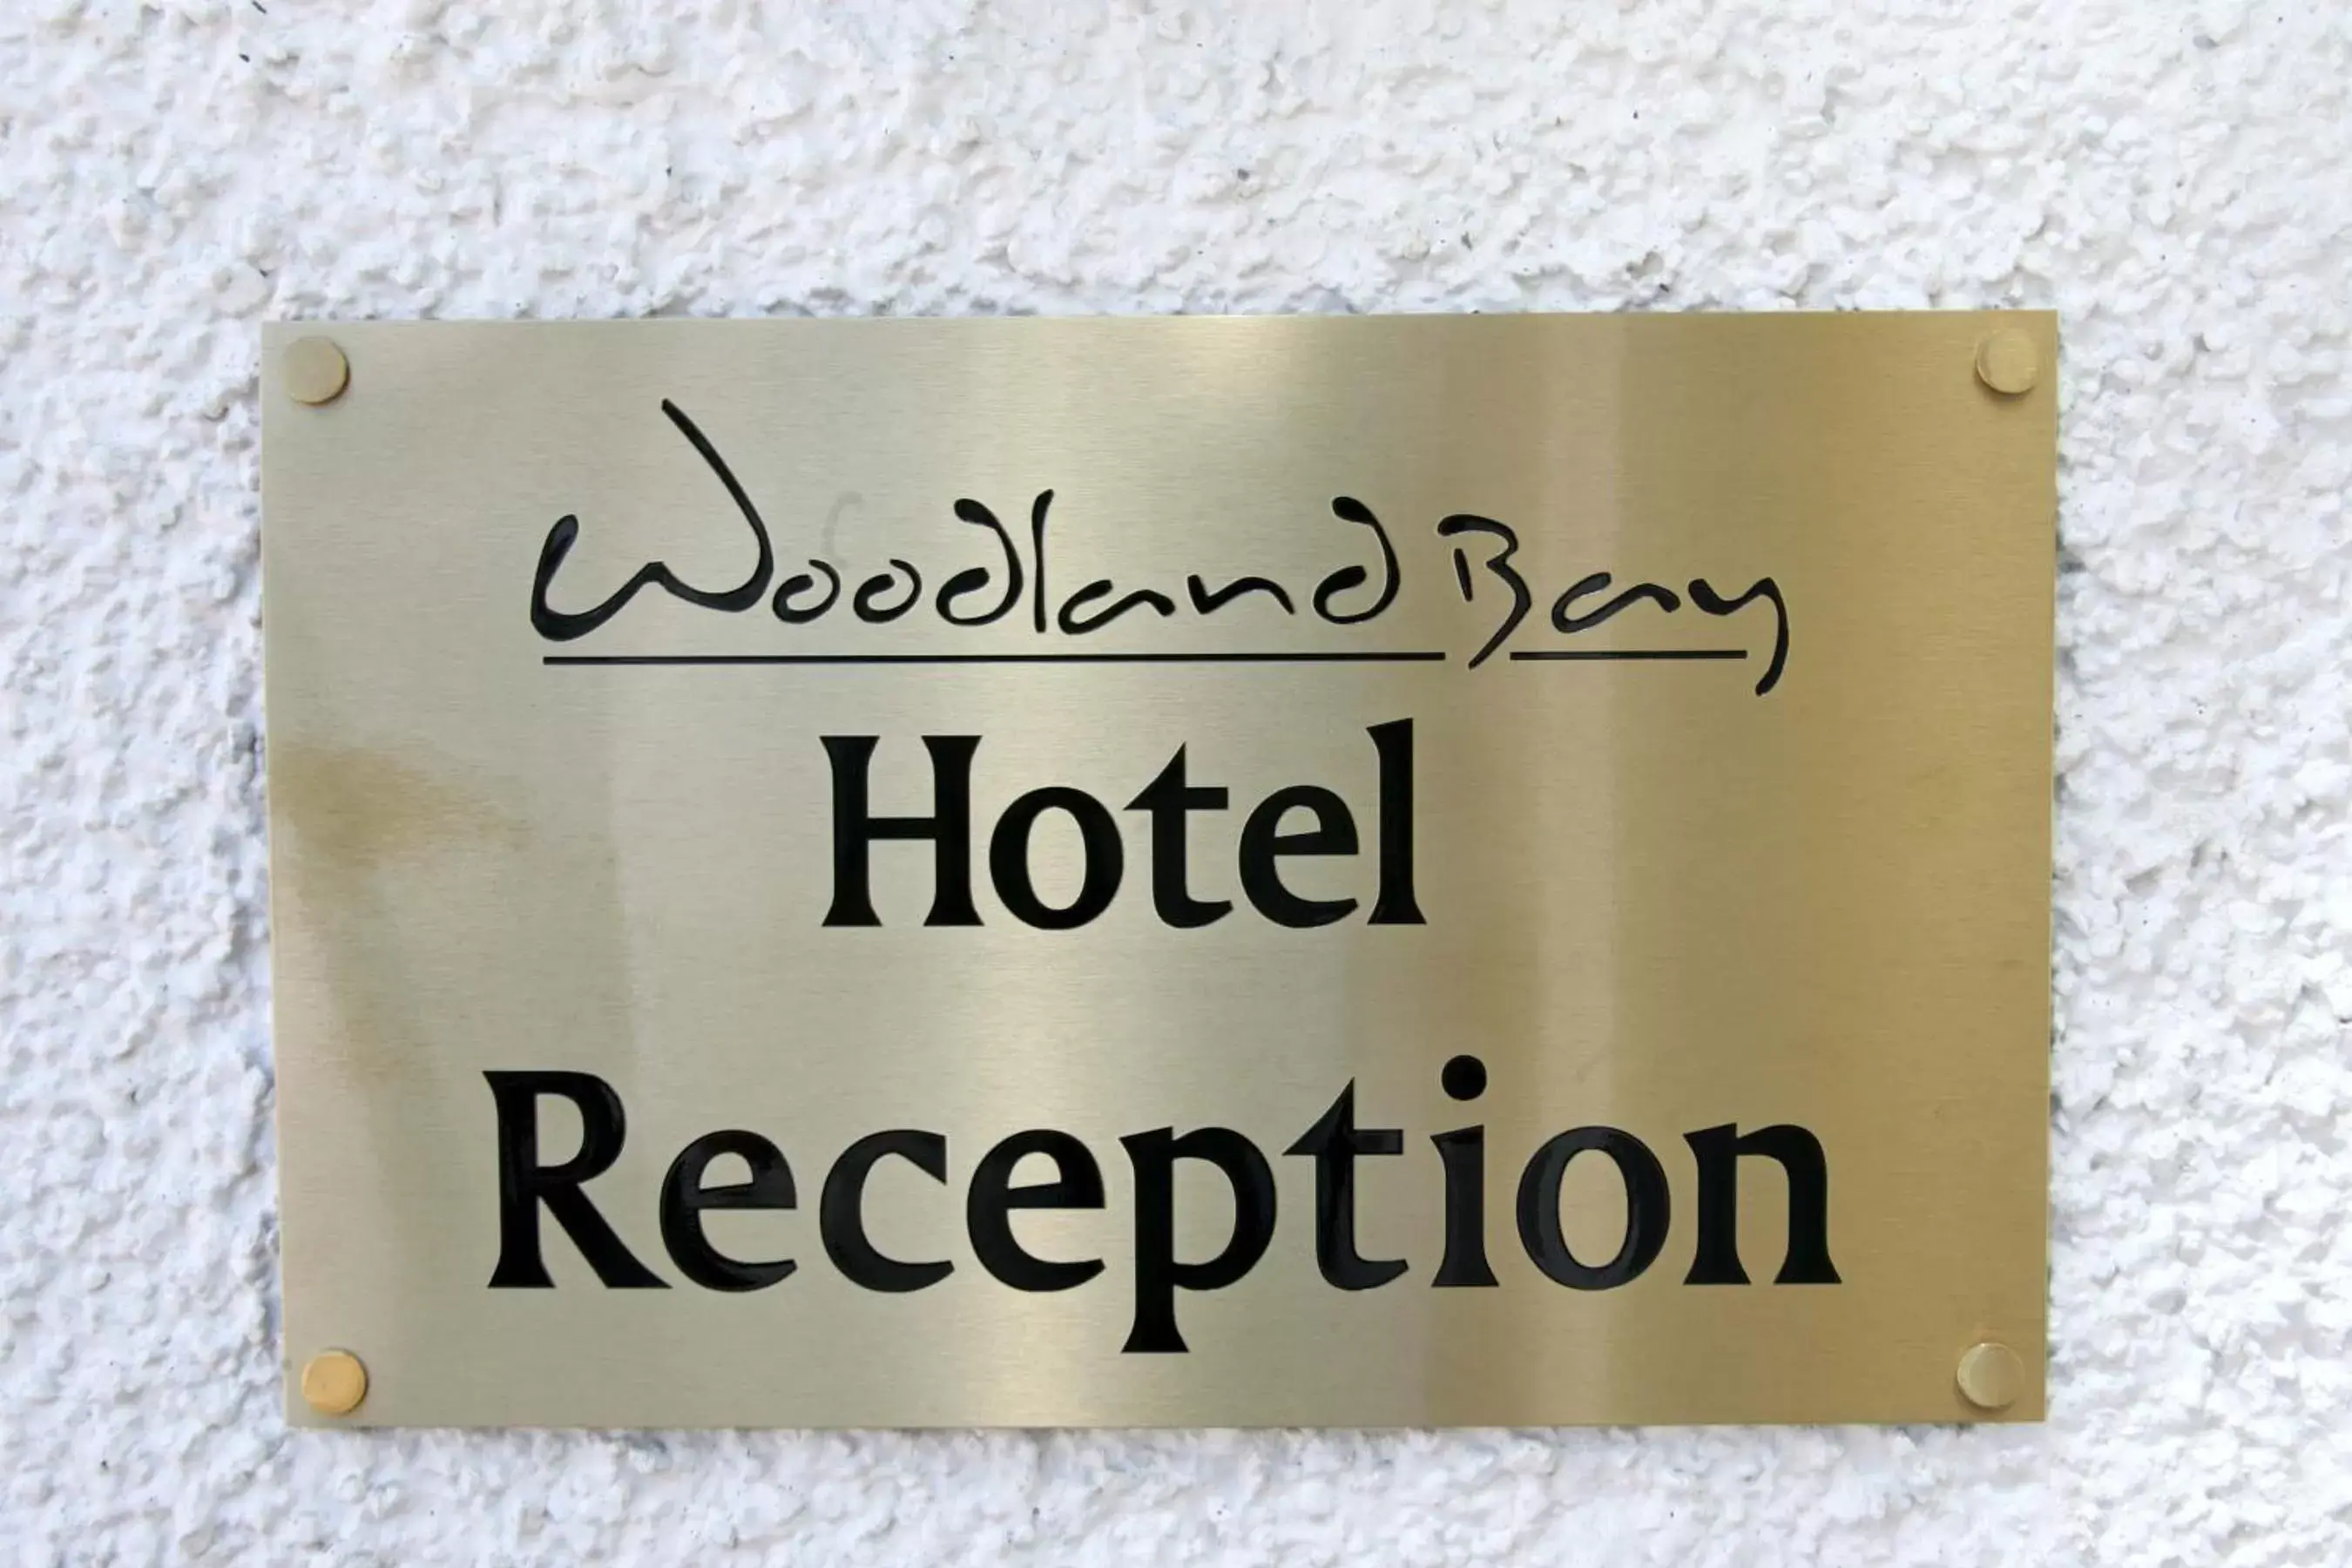 Property logo or sign in Woodland Bay Hotel